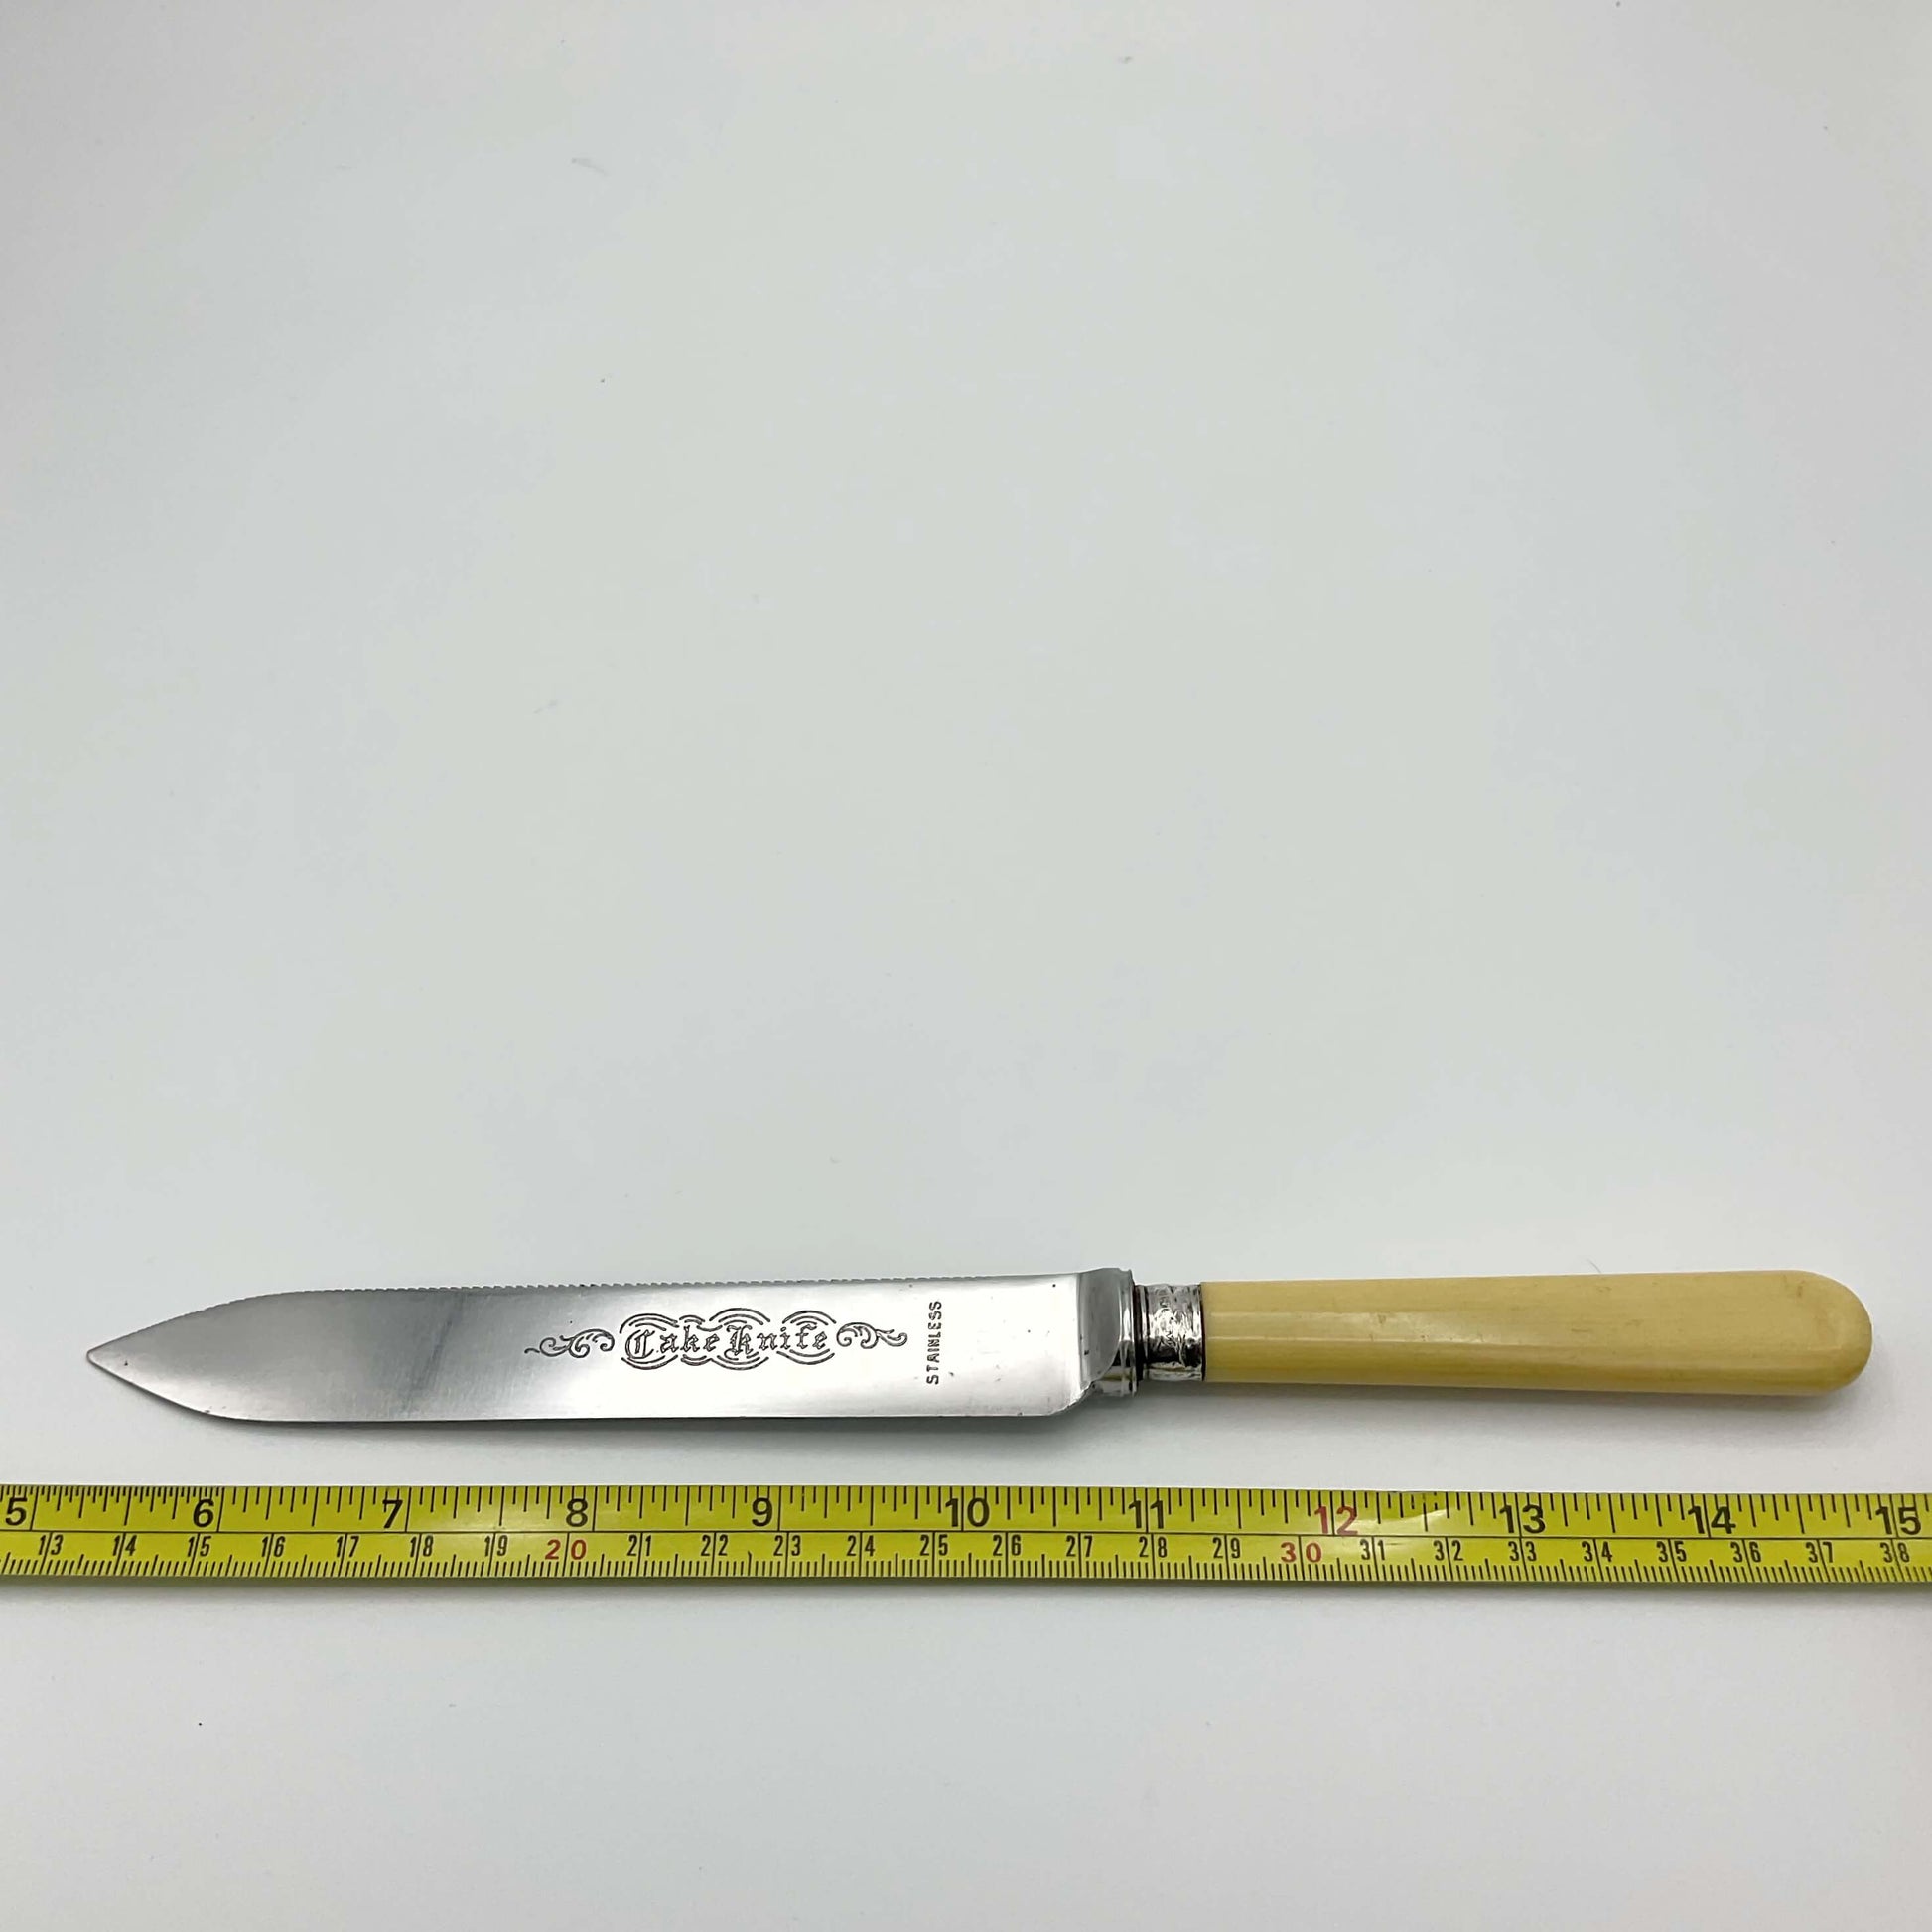 Vintage cake knife next to tape measure showing it’s 10 inches in length.